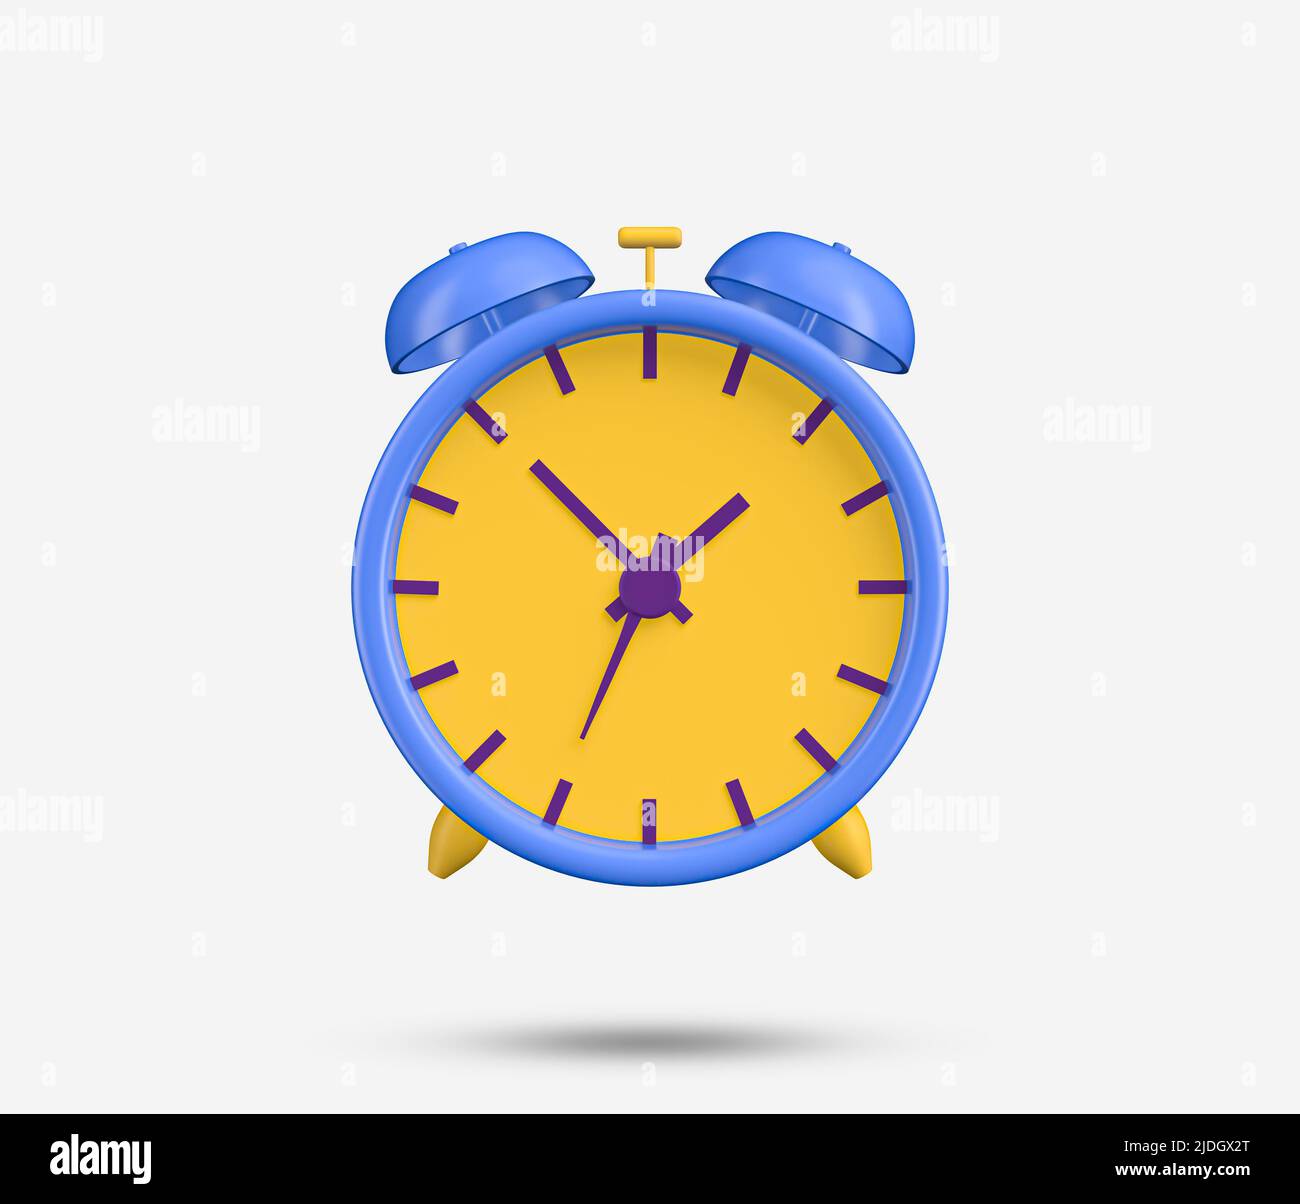 Table clock 3d icon. Realistic alarm clock symbol. Time management instrument. 3D Rendered Illustration. Stock Photo